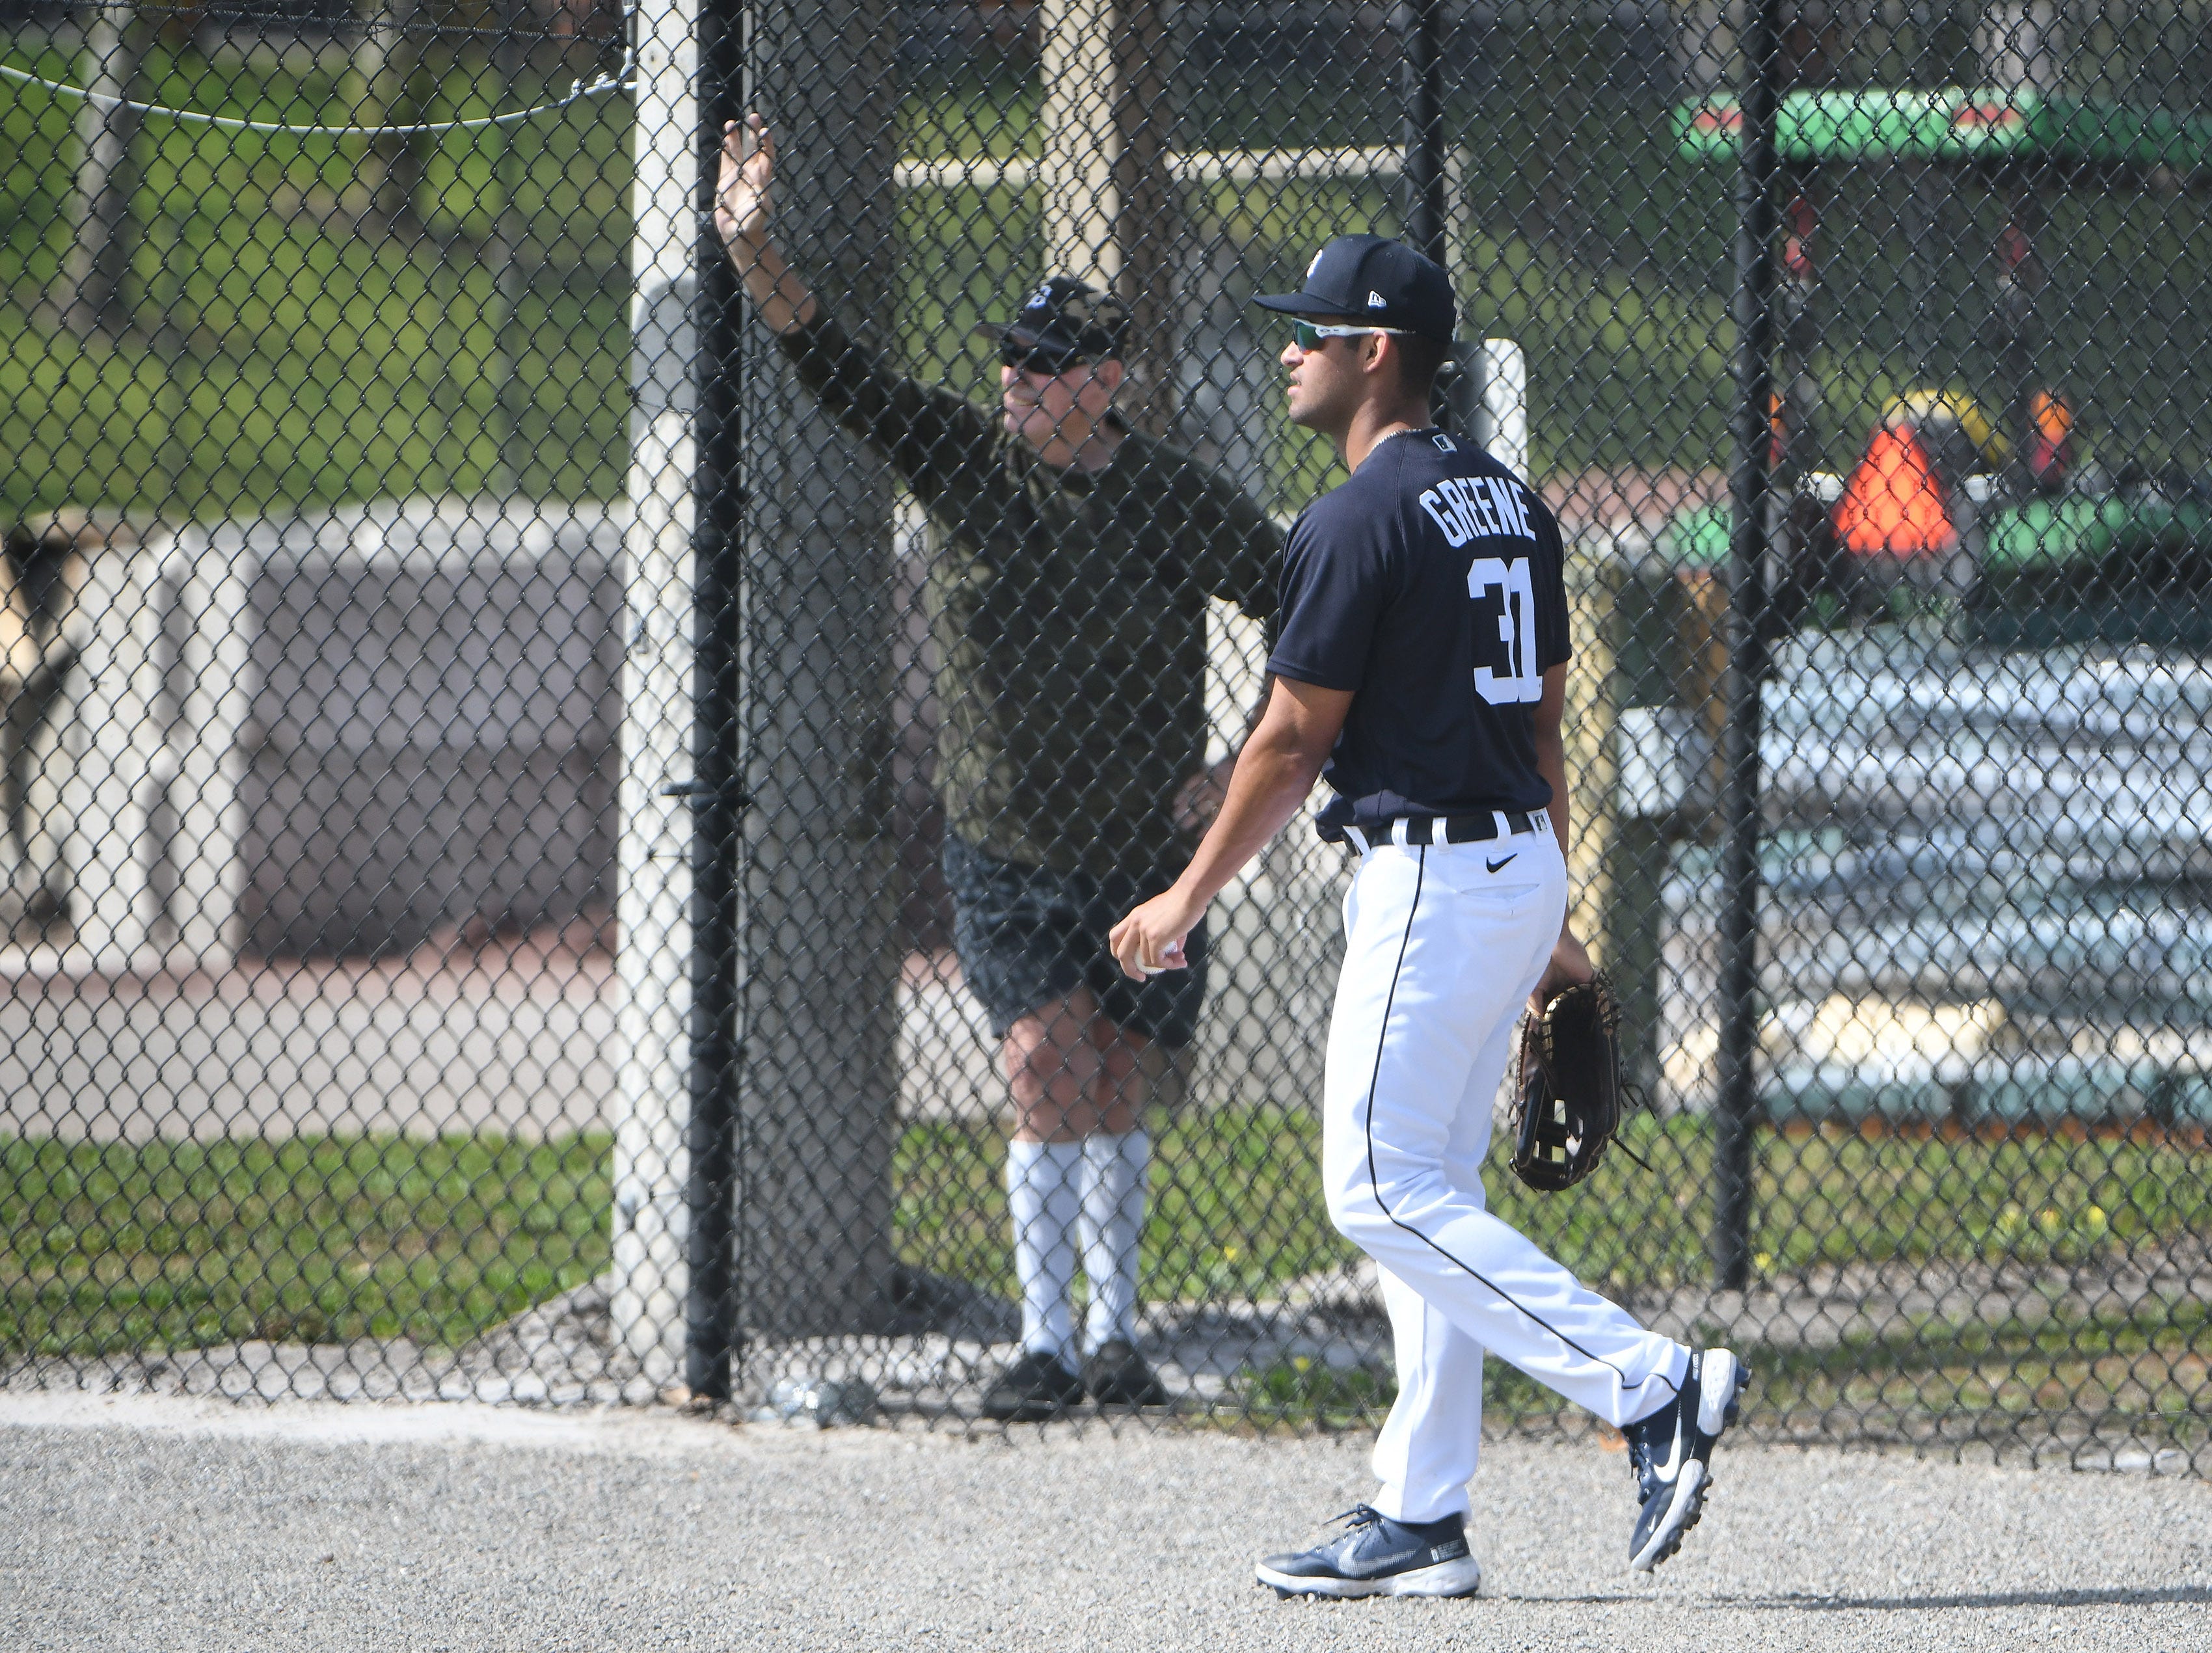 Tigers prospect Riley Greene walks past a fan at the outfield fence.